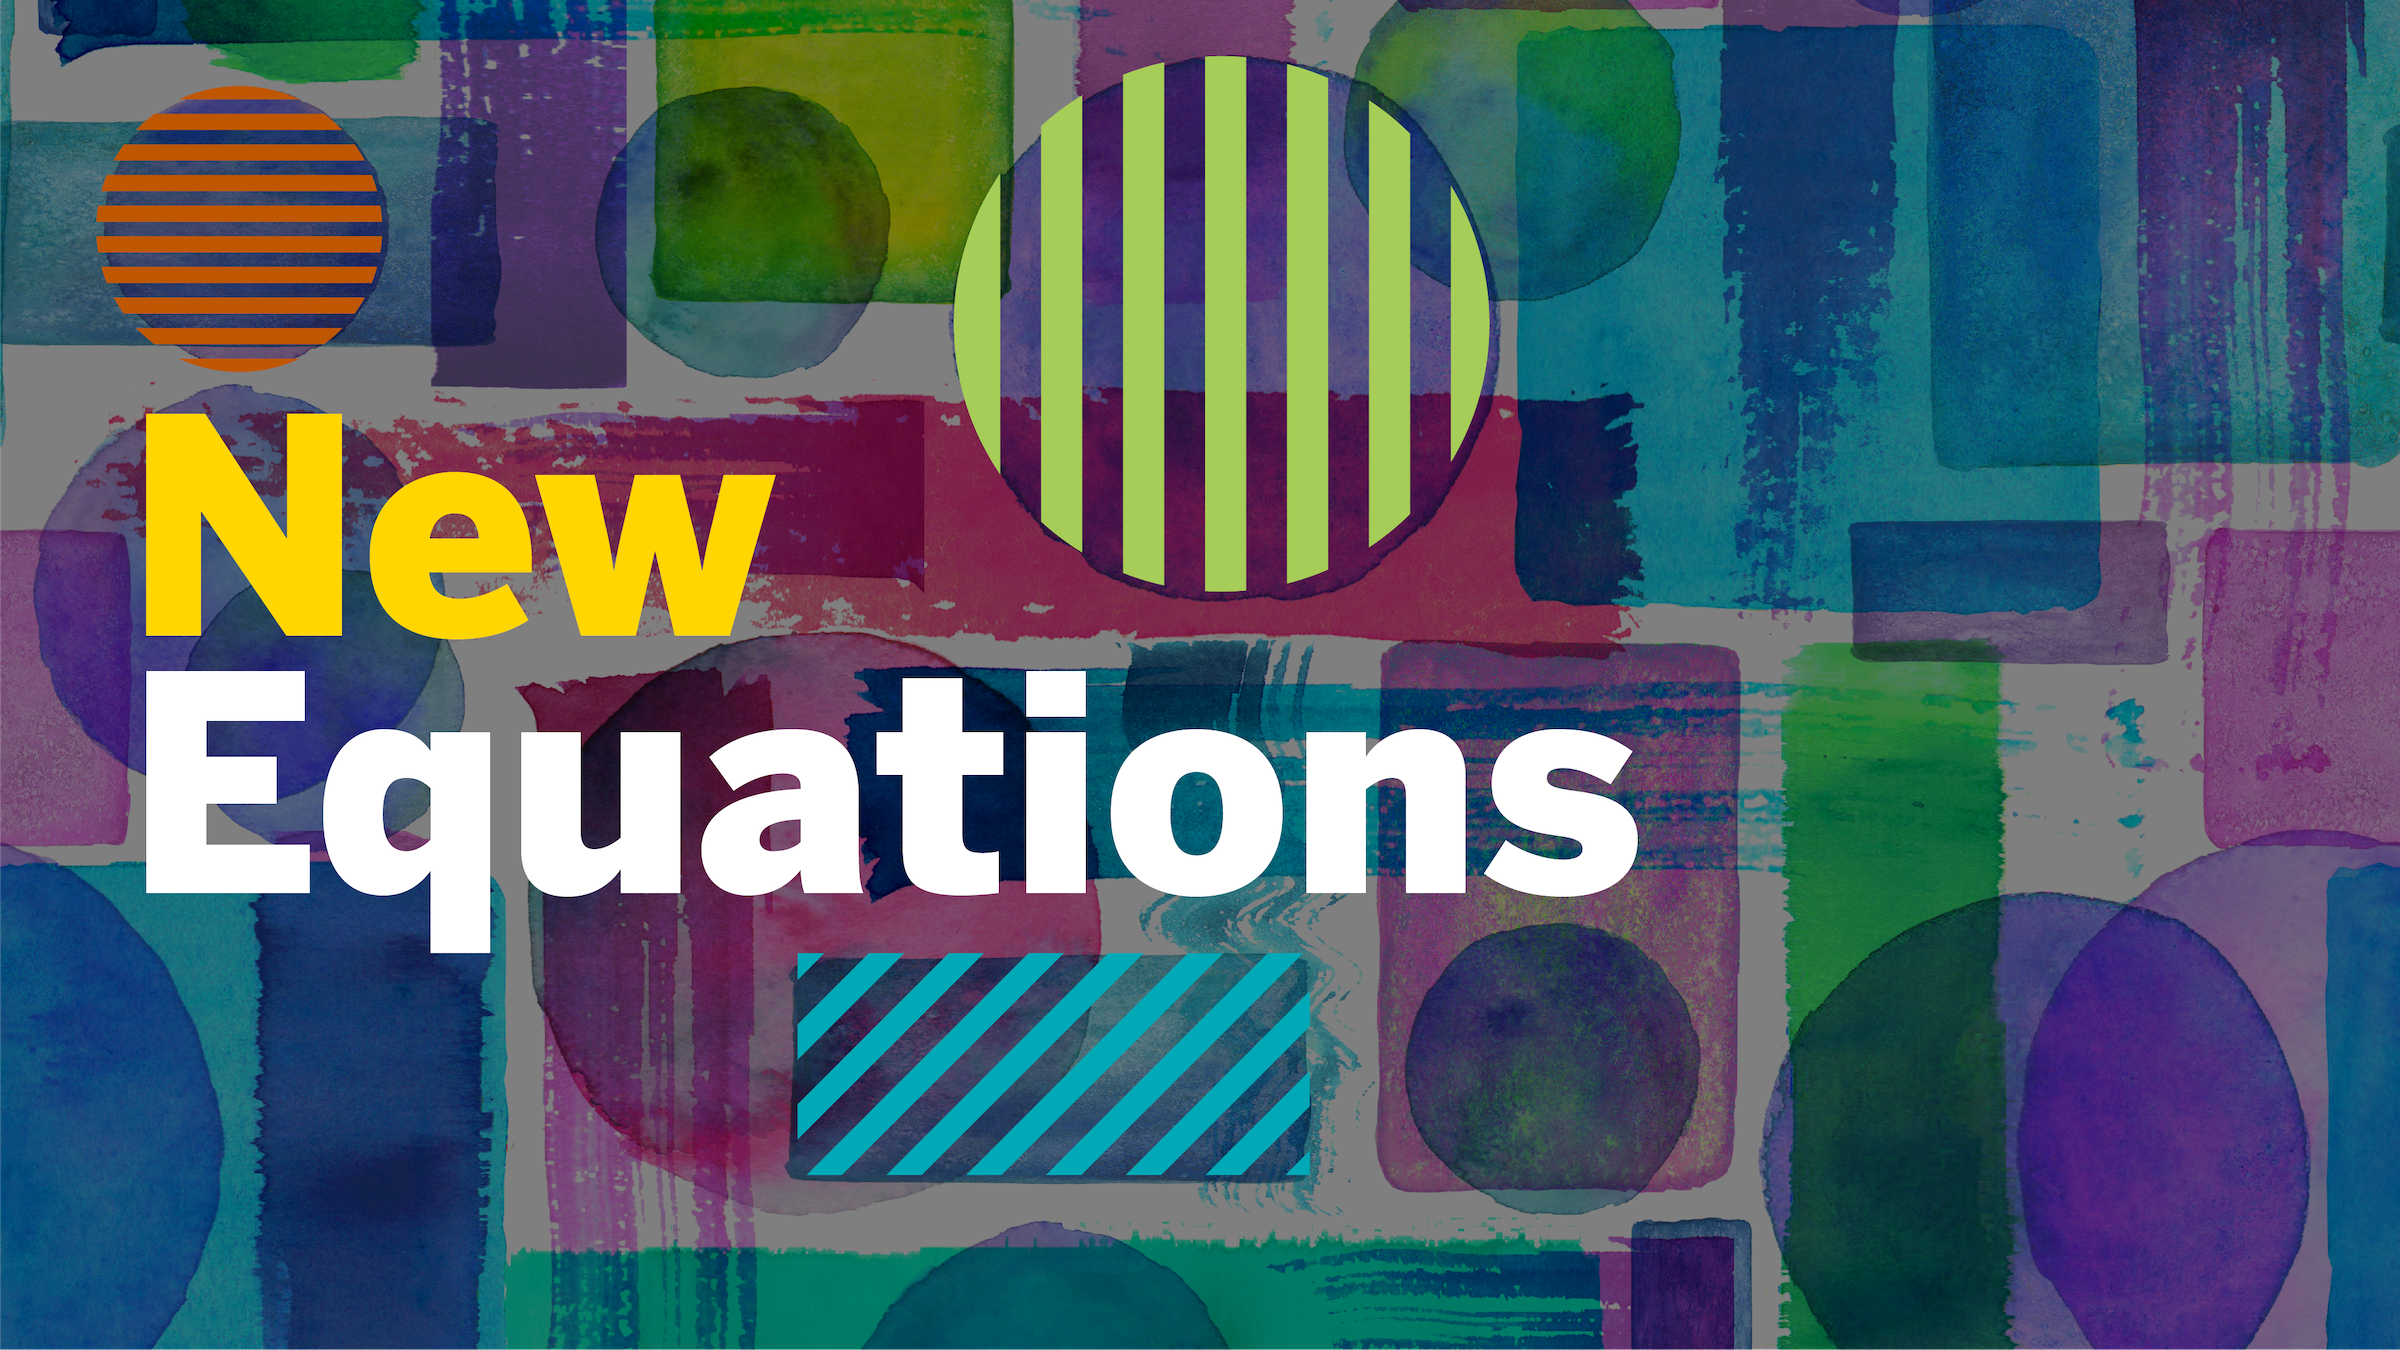 "New Equations" appears in text atop and alongside shapes and abstract art in many colors